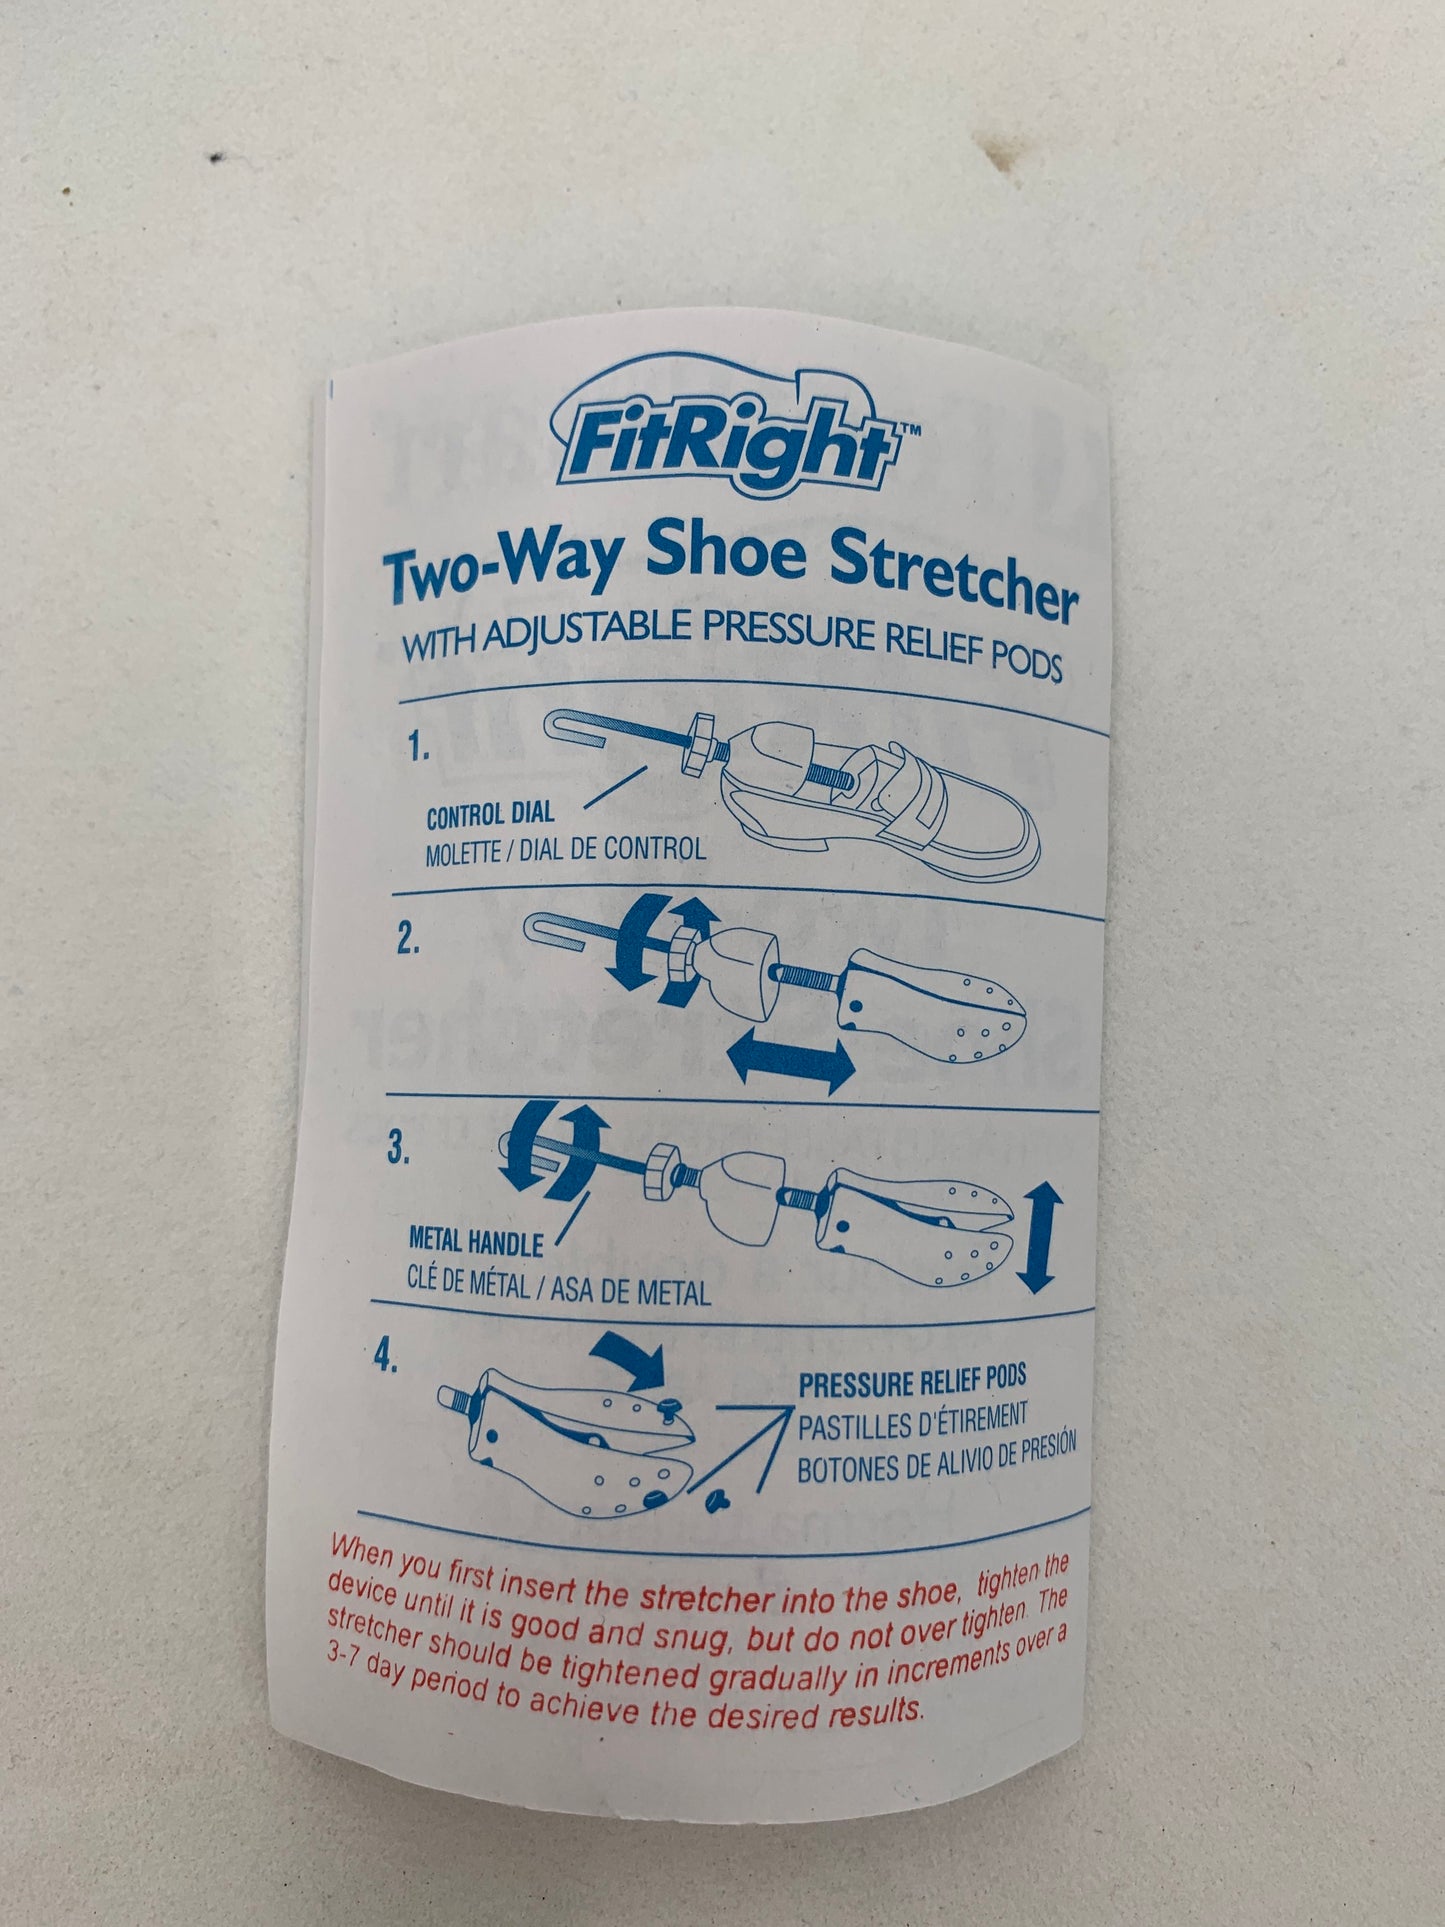 Footsmart Fit Right Two Way Shoe Stretcher W/ Pressure Release Pods New